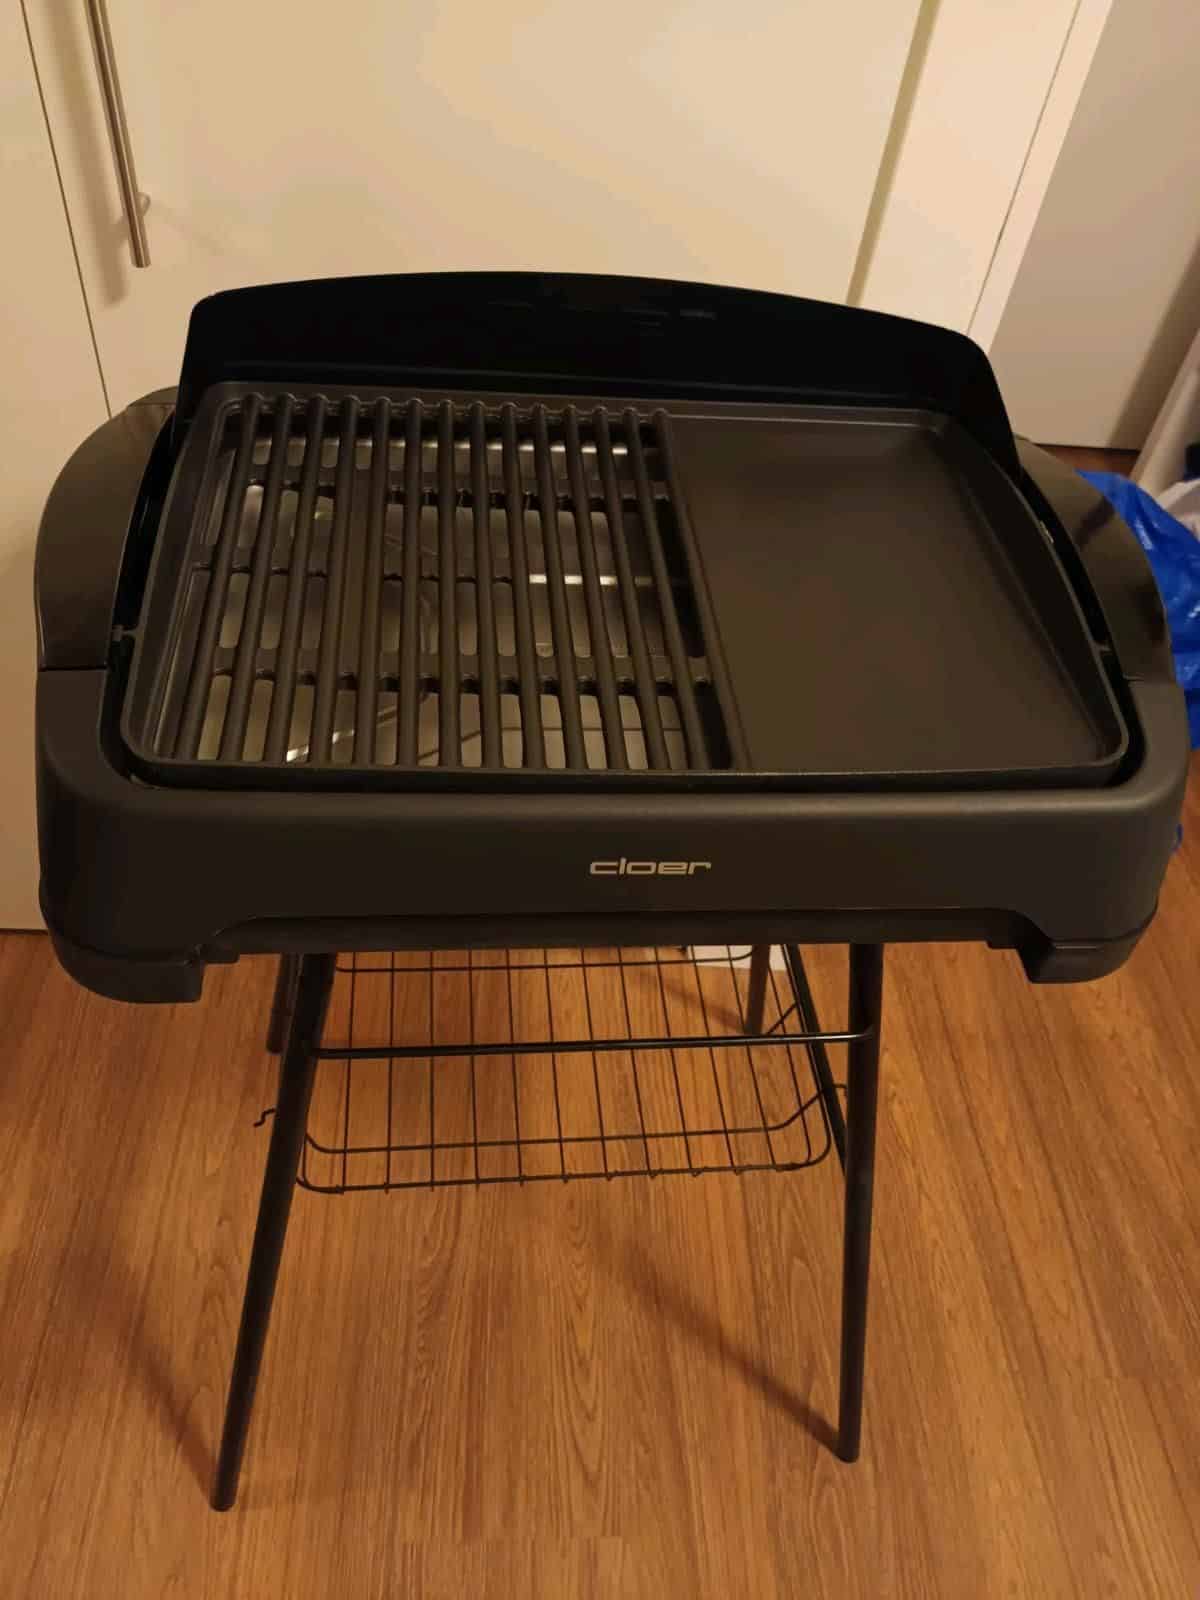 Cloer 6750 Barbecue-Grill Standgrill